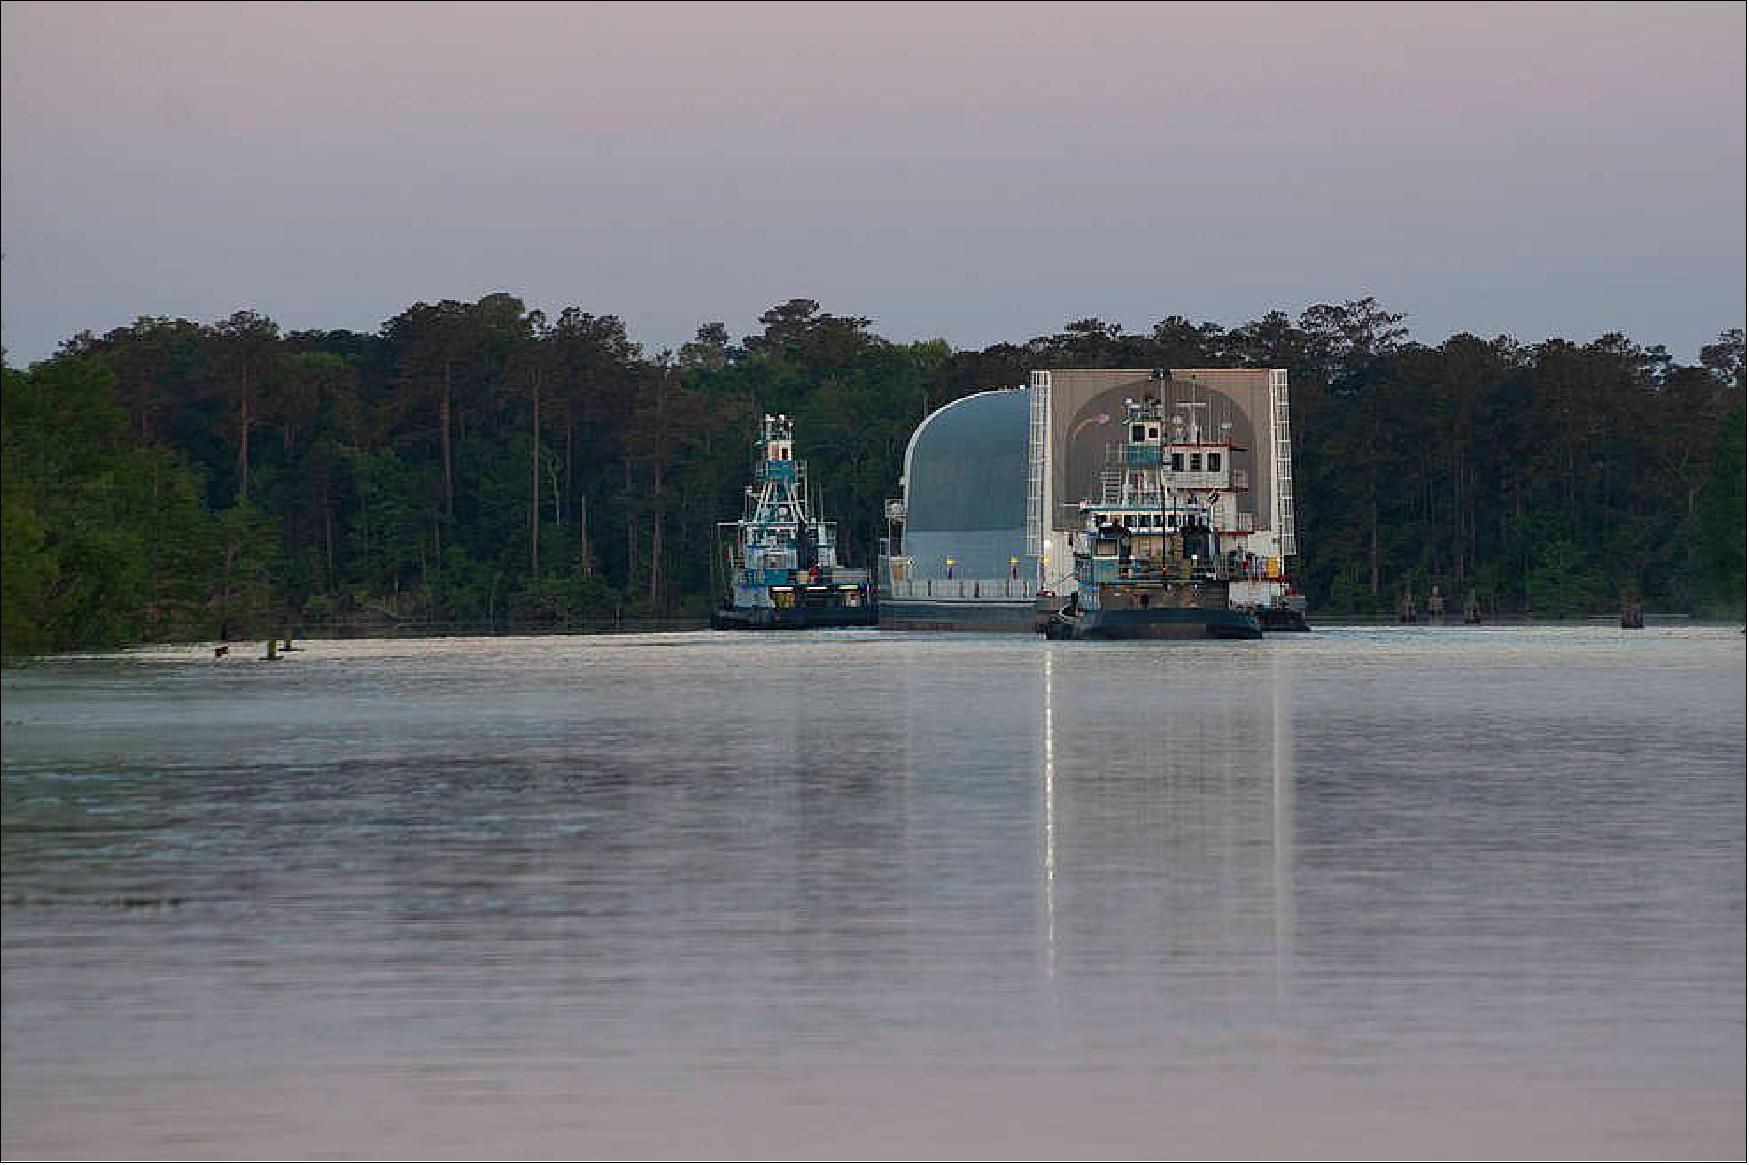 Figure 15: The first core stage of NASA's Space Launch System (SLS) rocket departs Stennis Space Center near Bay St. Louis, Mississippi, following completion of the Green Run series of tests of its design and systems (image credit: NASA)